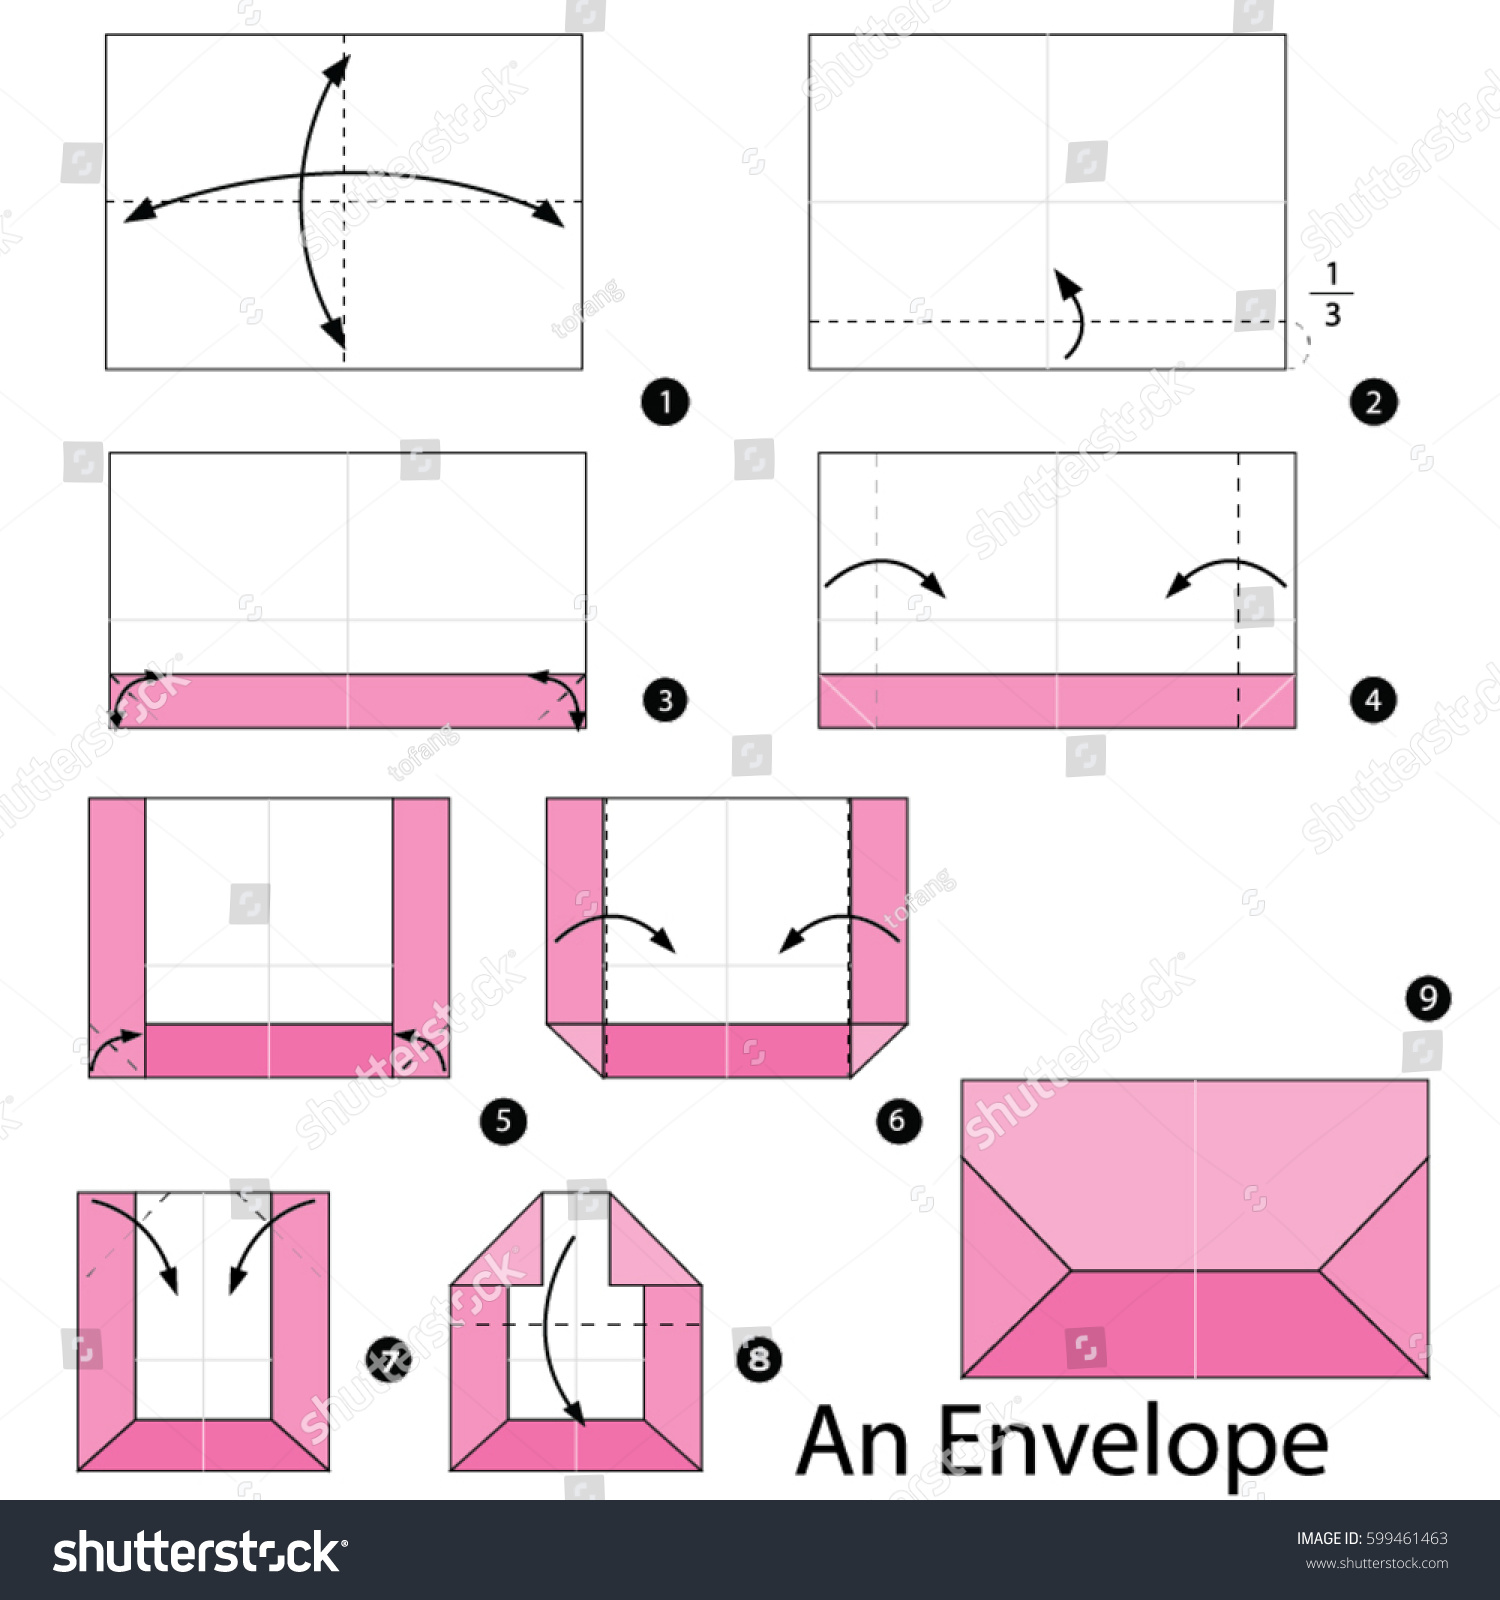 How To Wiki 89 How To Make An Envelope Step By Step